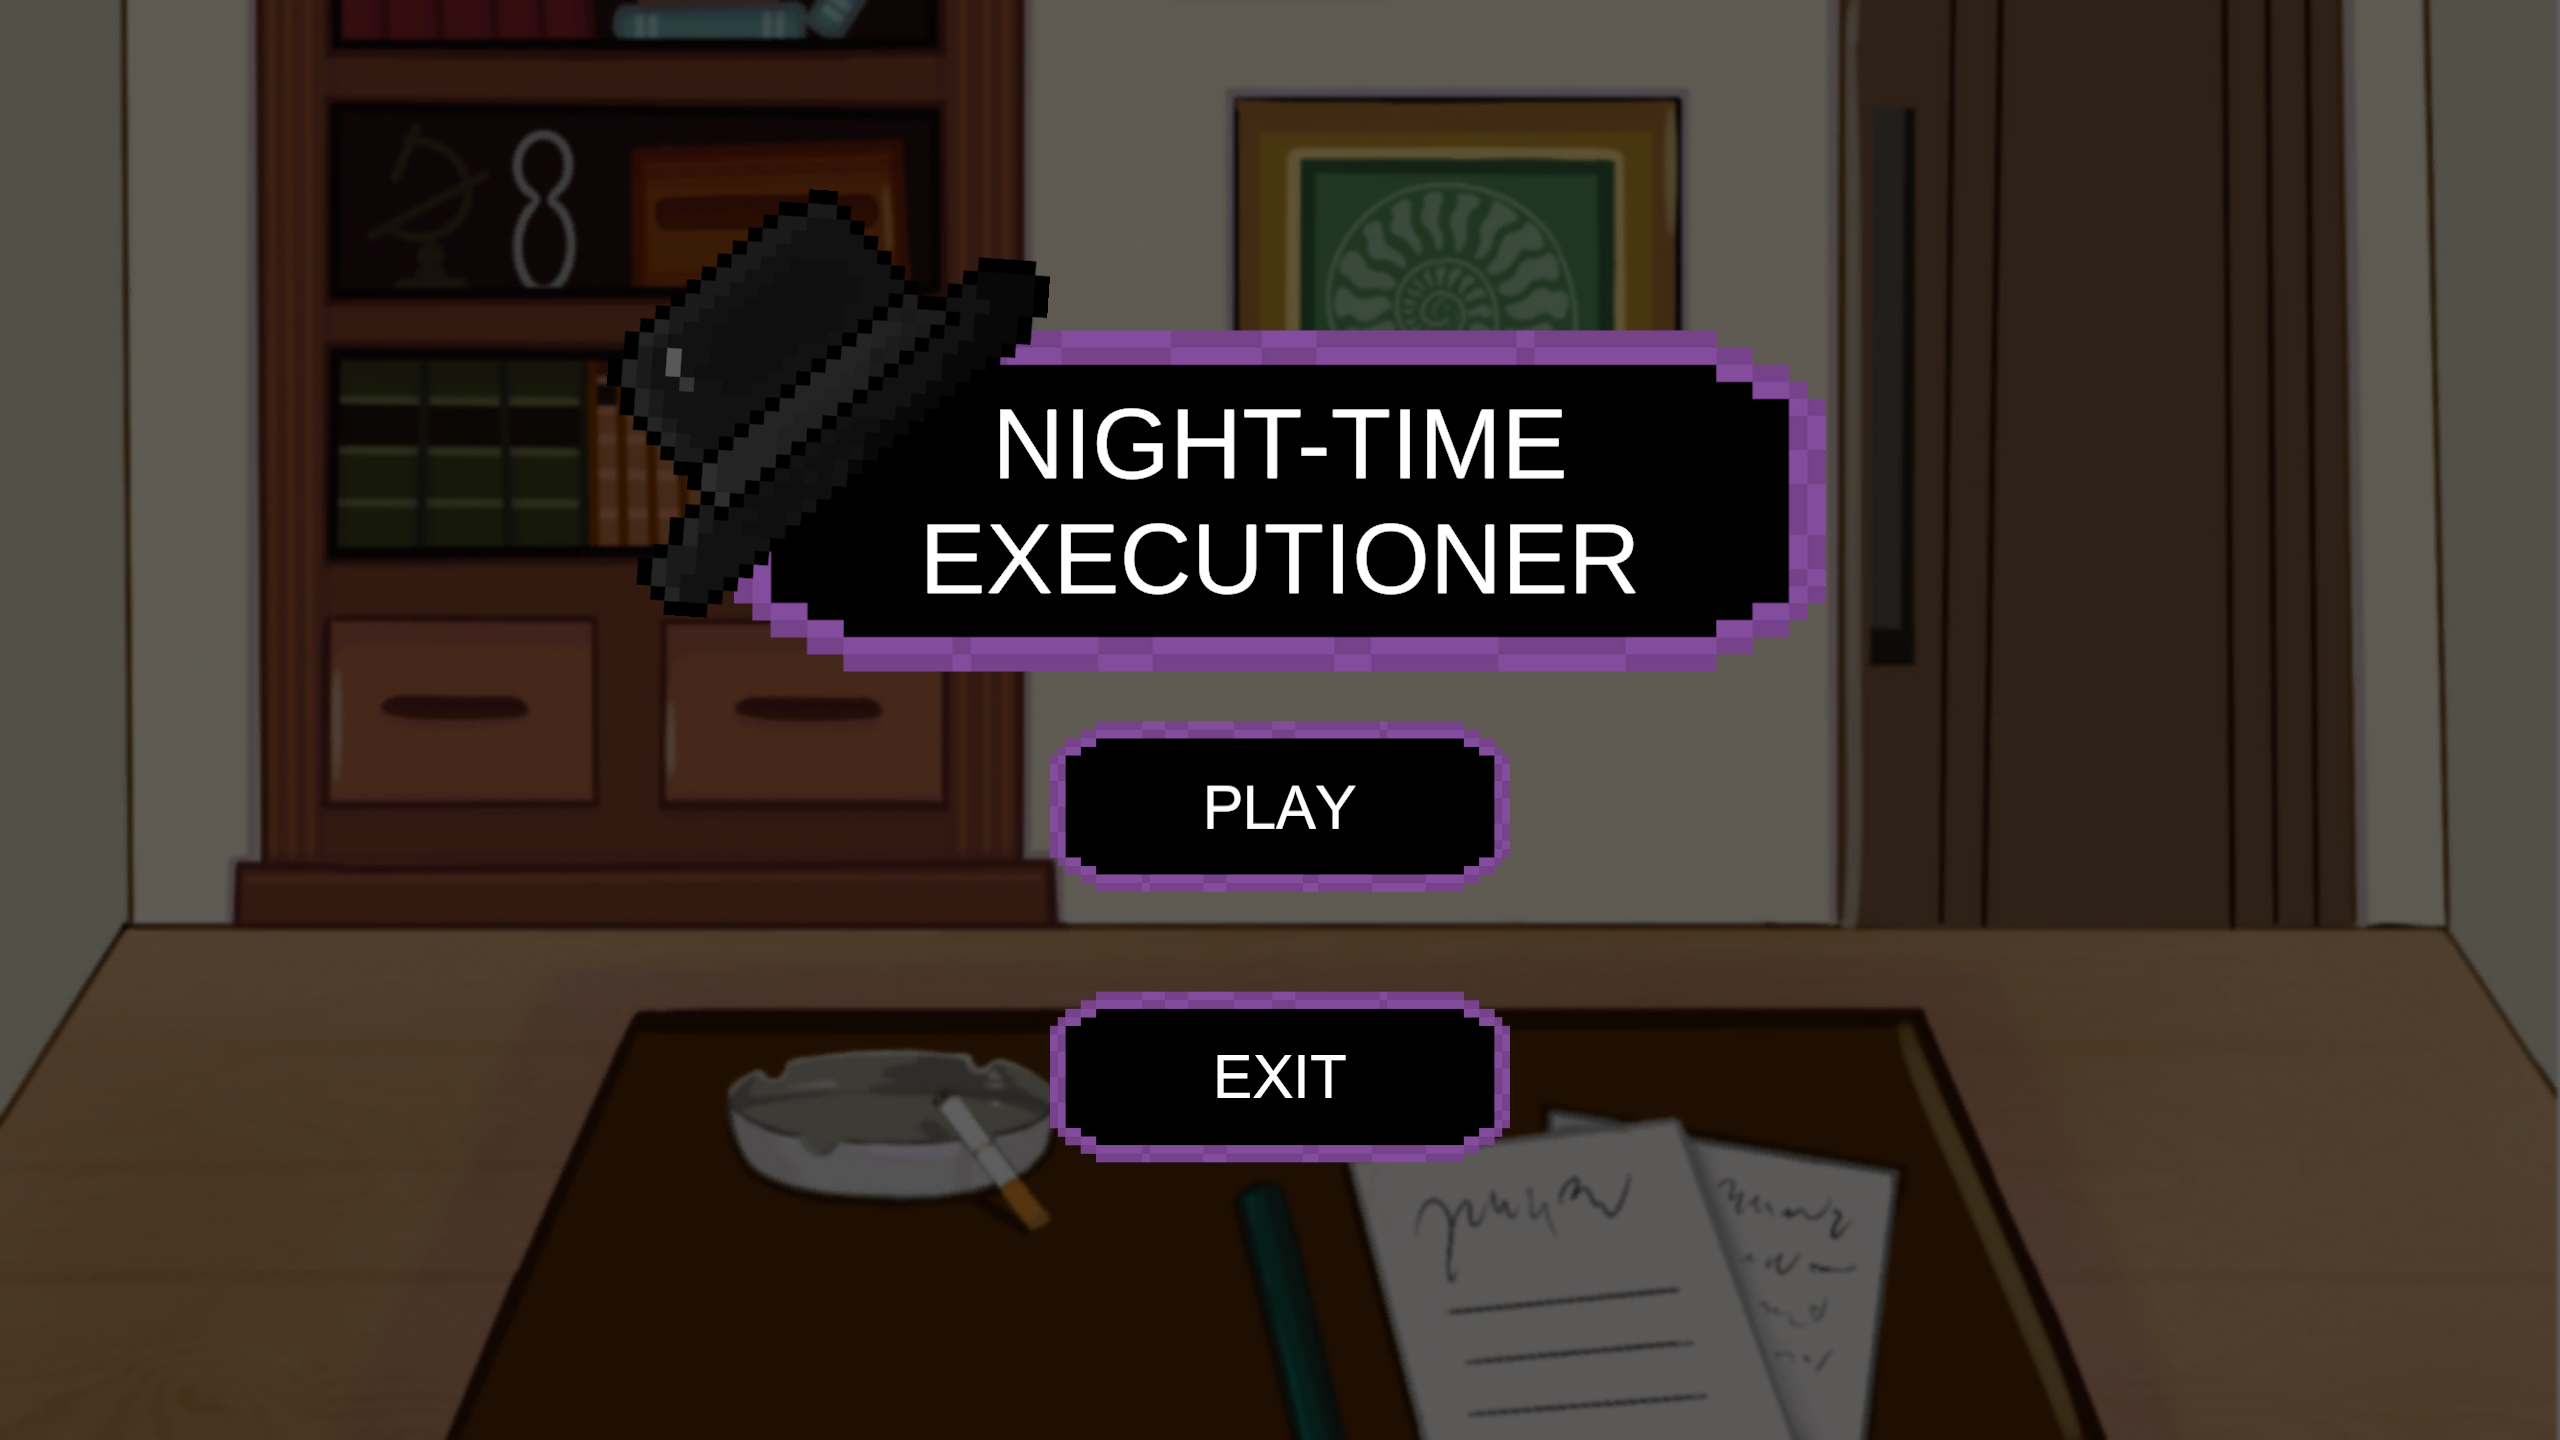 NIGHT-TIME EXECUTIONER